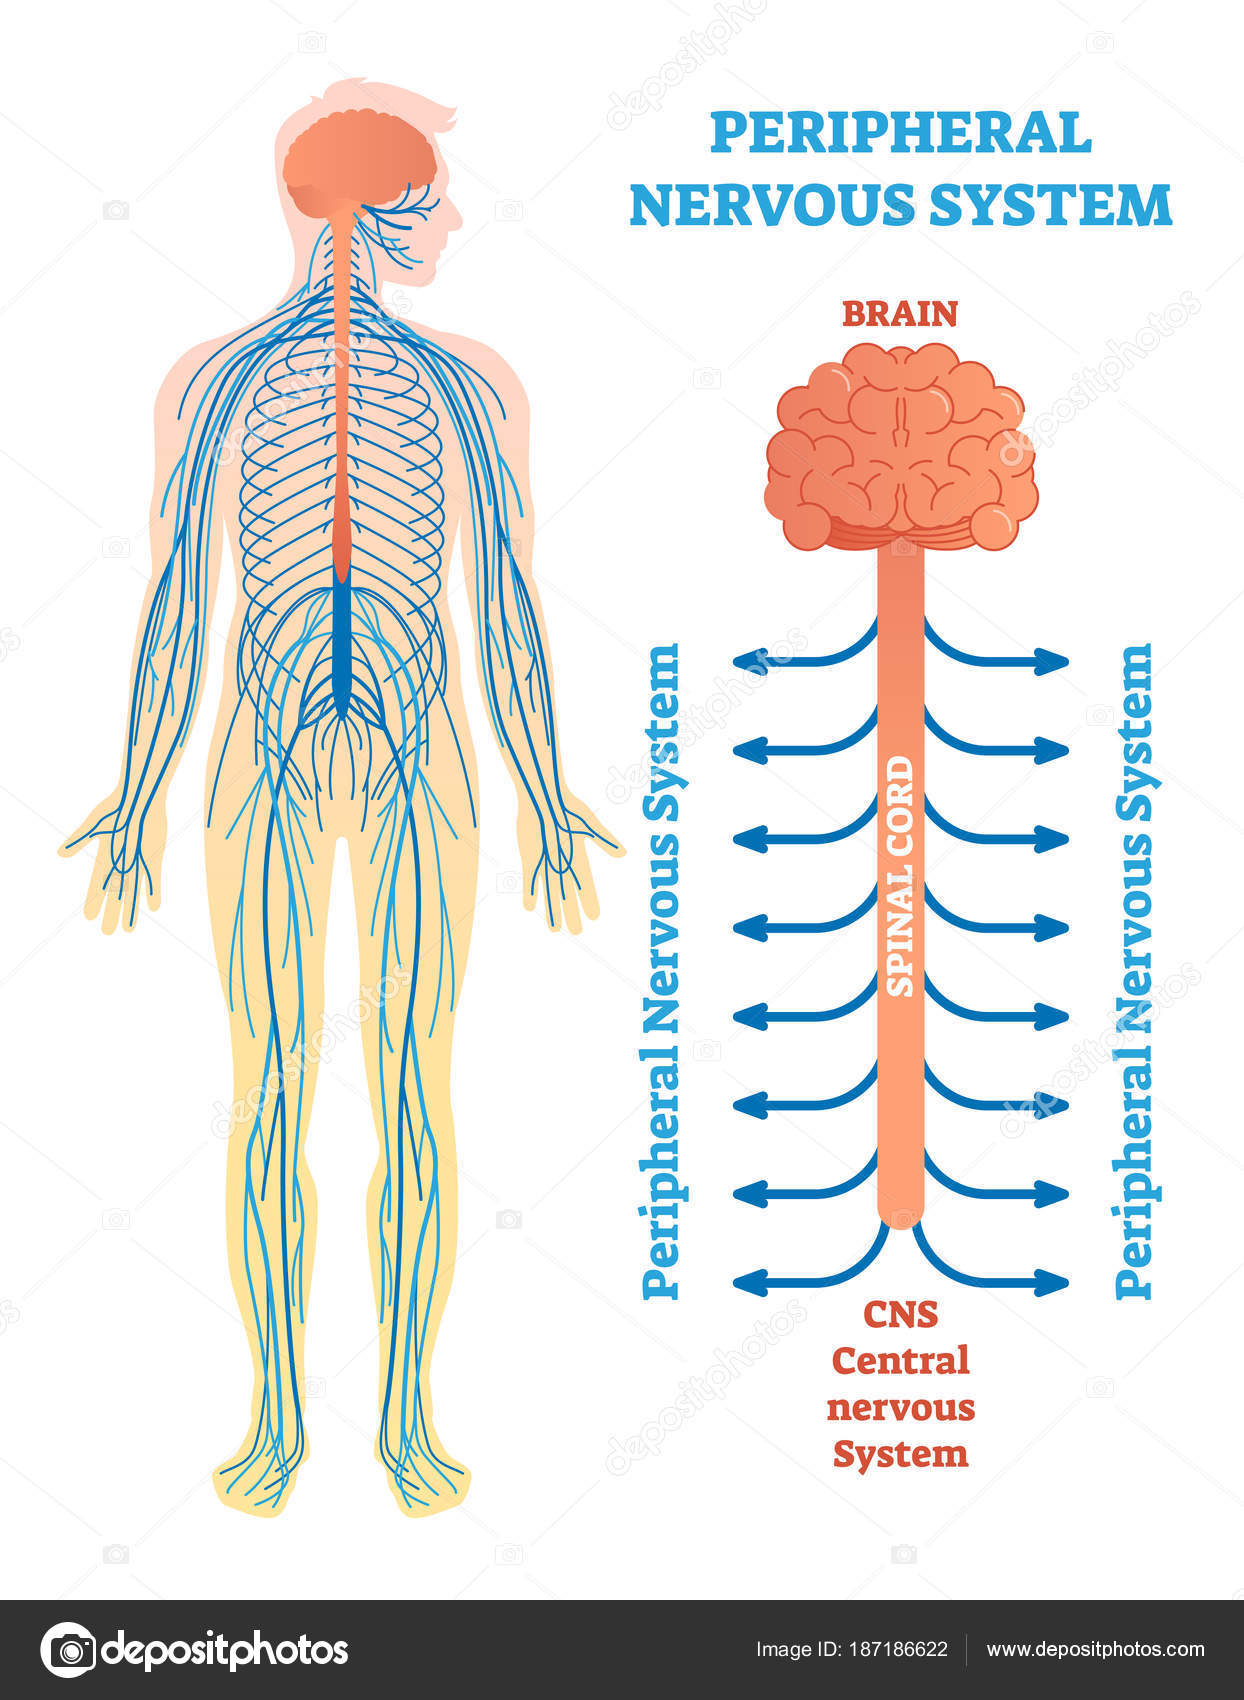 Spinal Cord Diagram Peripheral Nervous System Medical Vector Illustration Diagram With